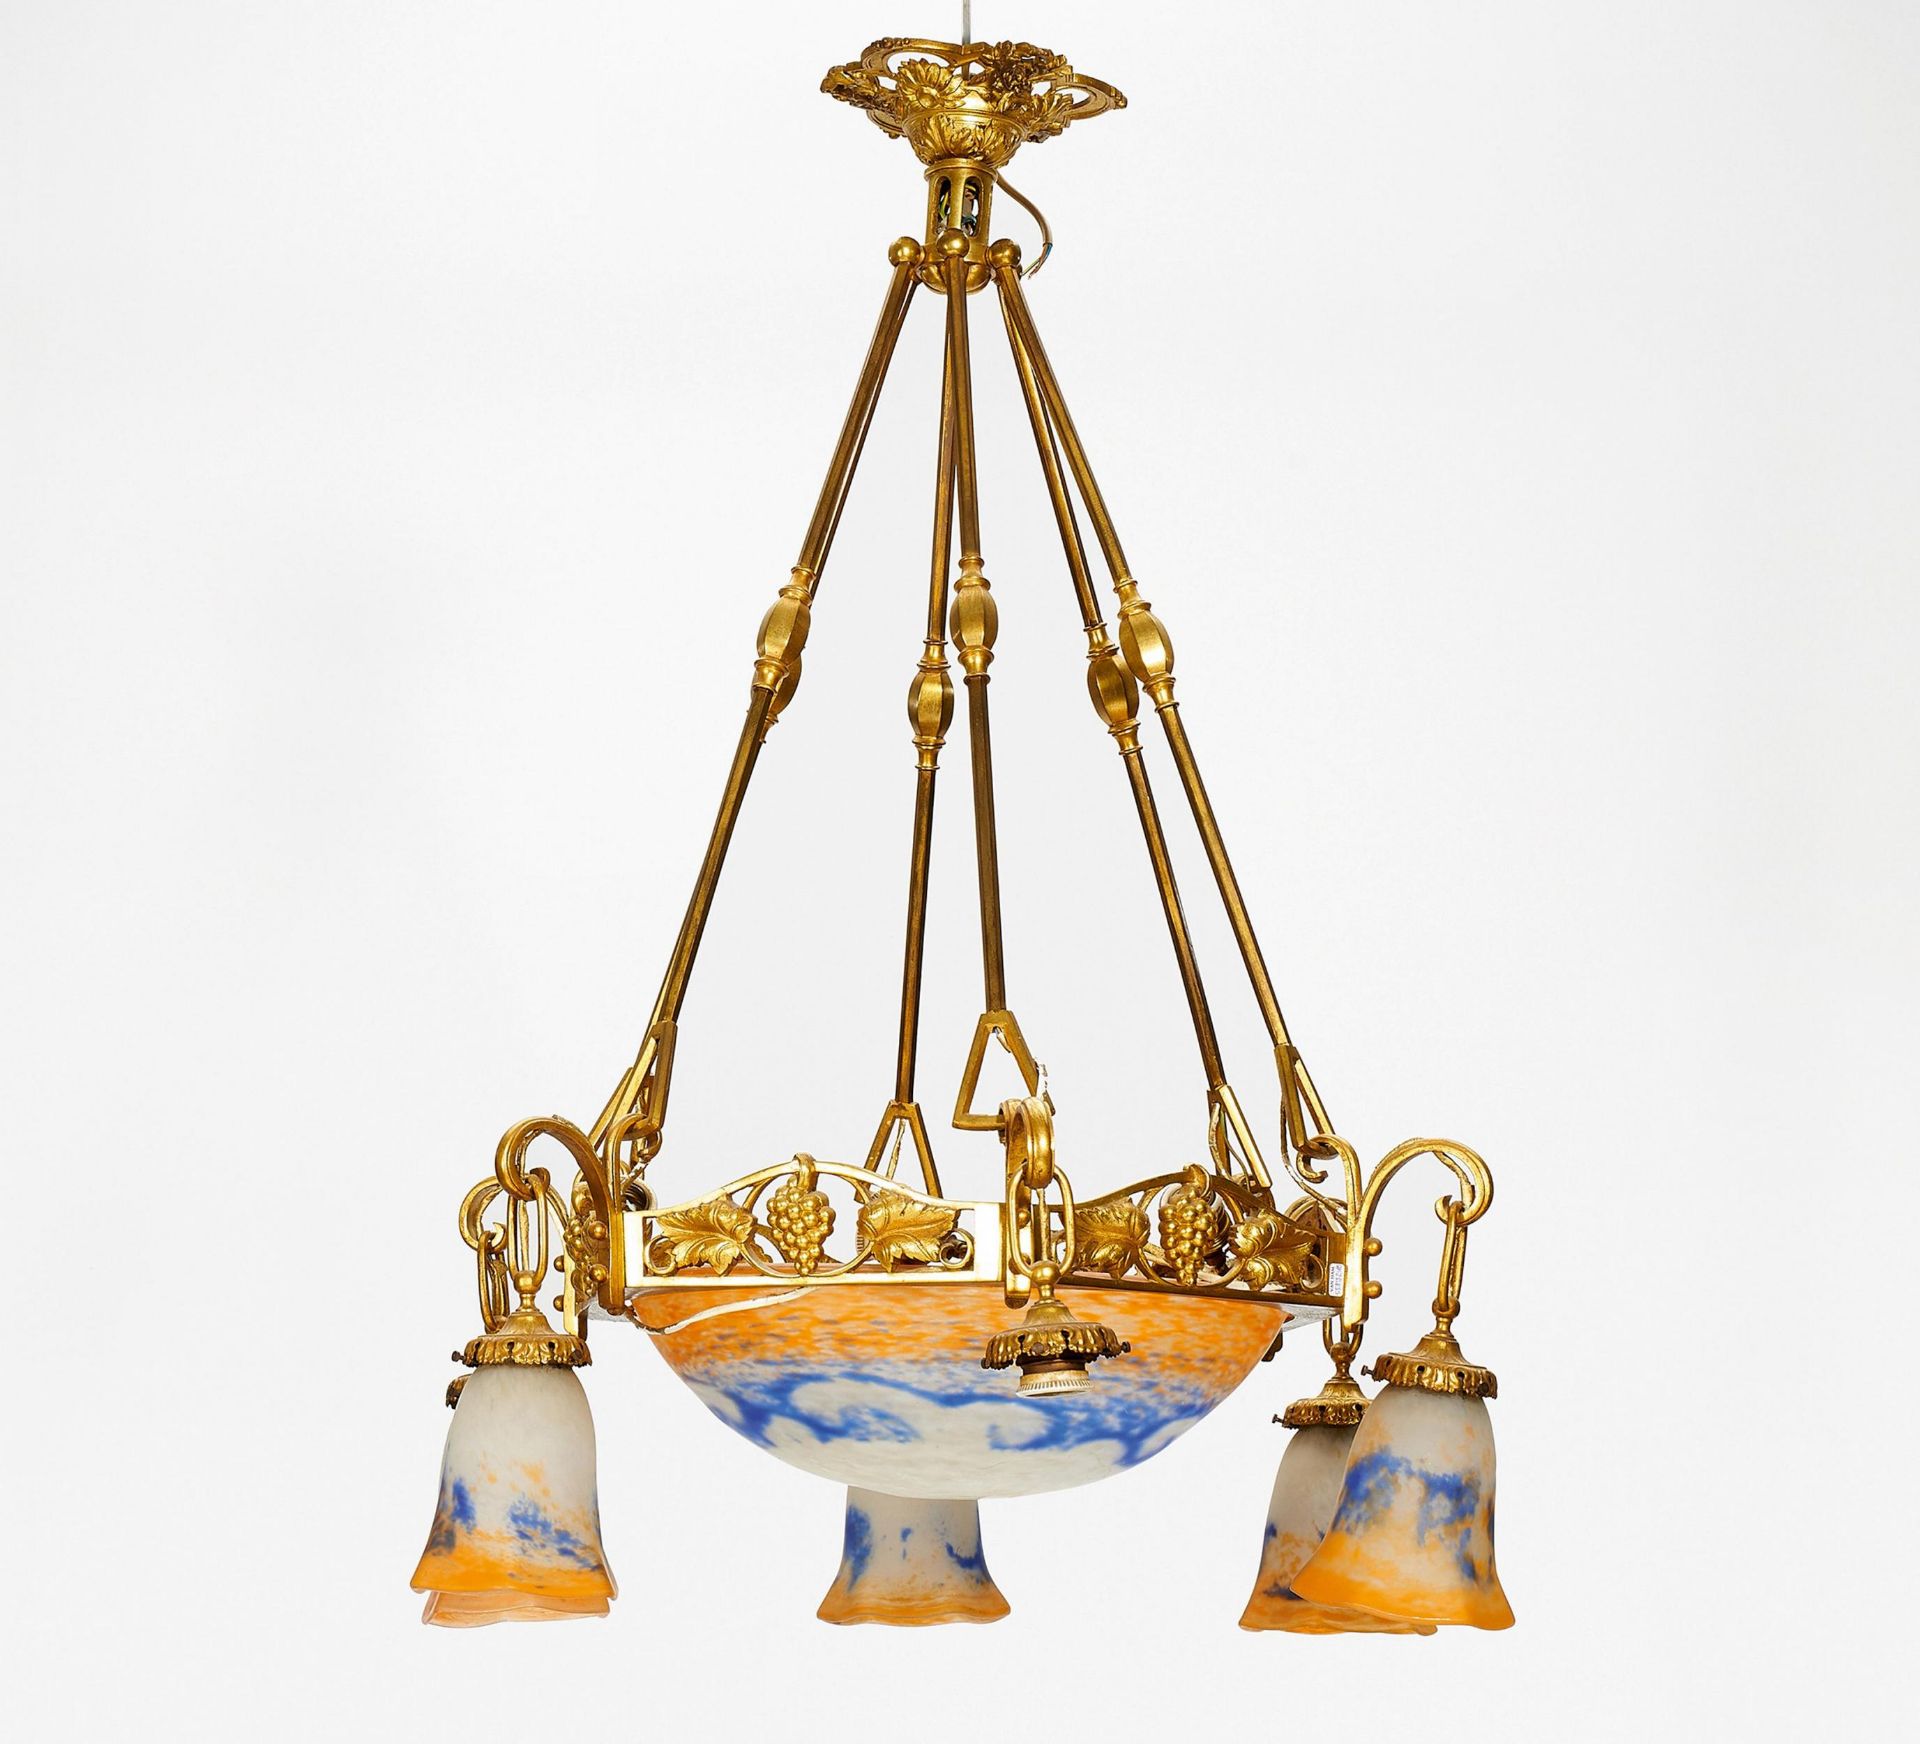 CEILING LAMP Dijon. Jean Noverdy. 1920-1930 Acromantic glass, with milky white, orange and blue